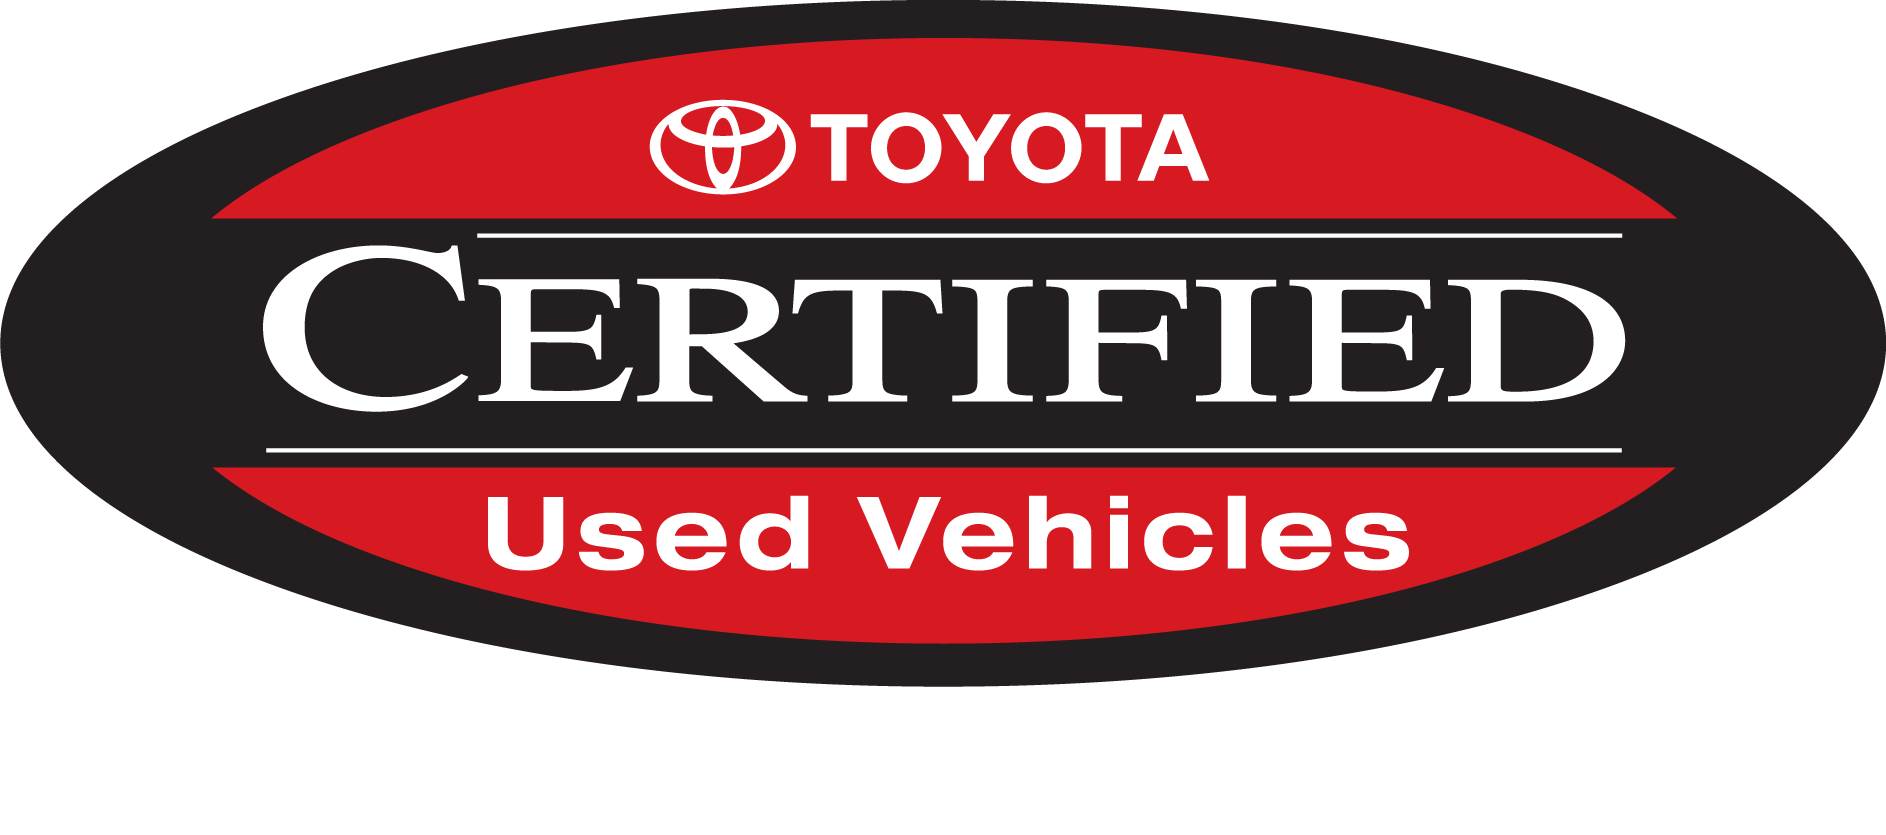 Toyota Certified Used Vehicles Logo PNG image